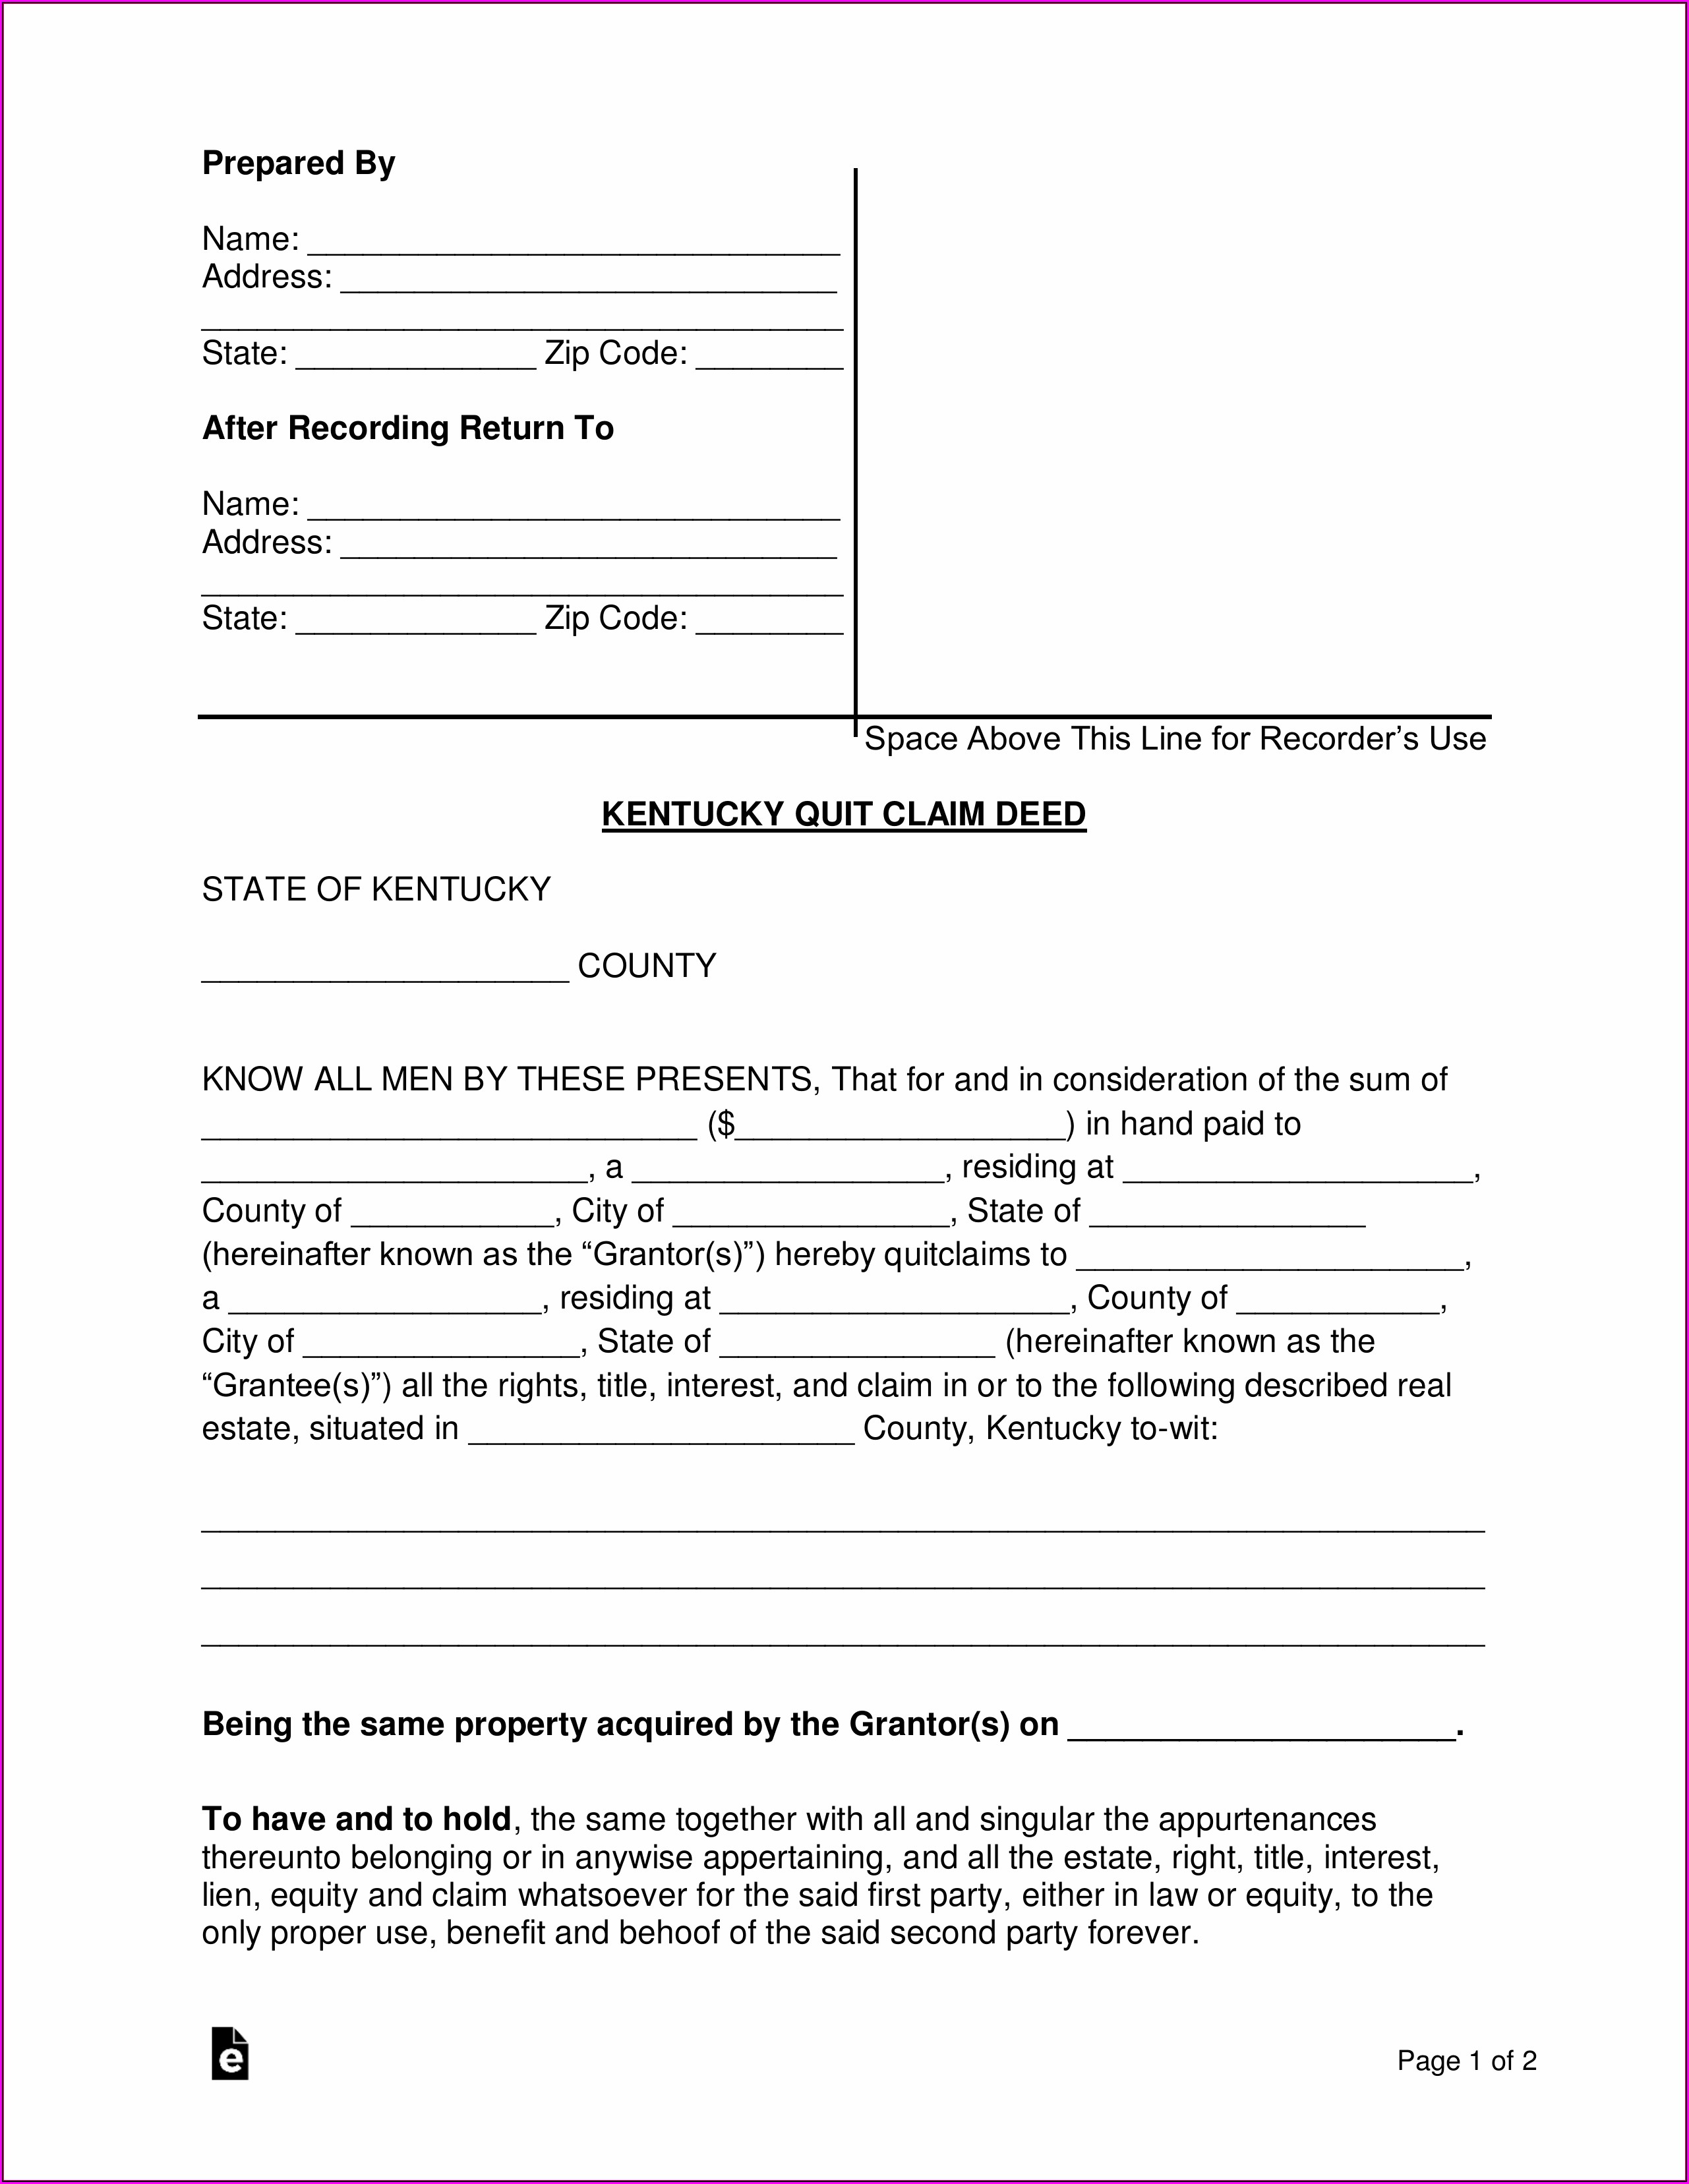 Kentucky Quit Claim Deed Form Free